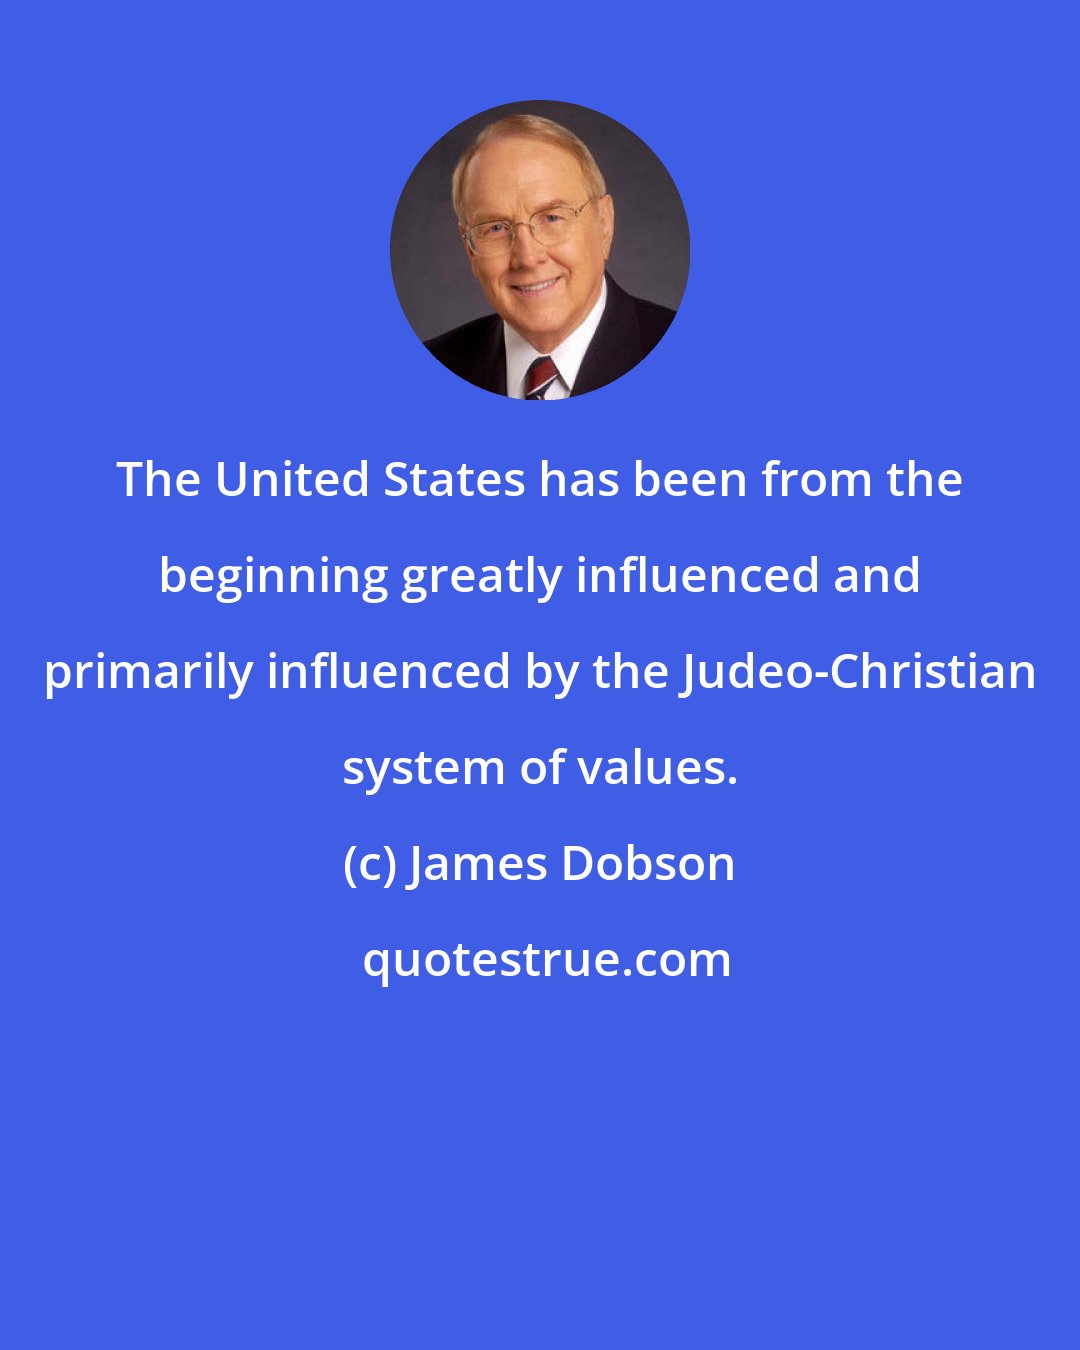 James Dobson: The United States has been from the beginning greatly influenced and primarily influenced by the Judeo-Christian system of values.